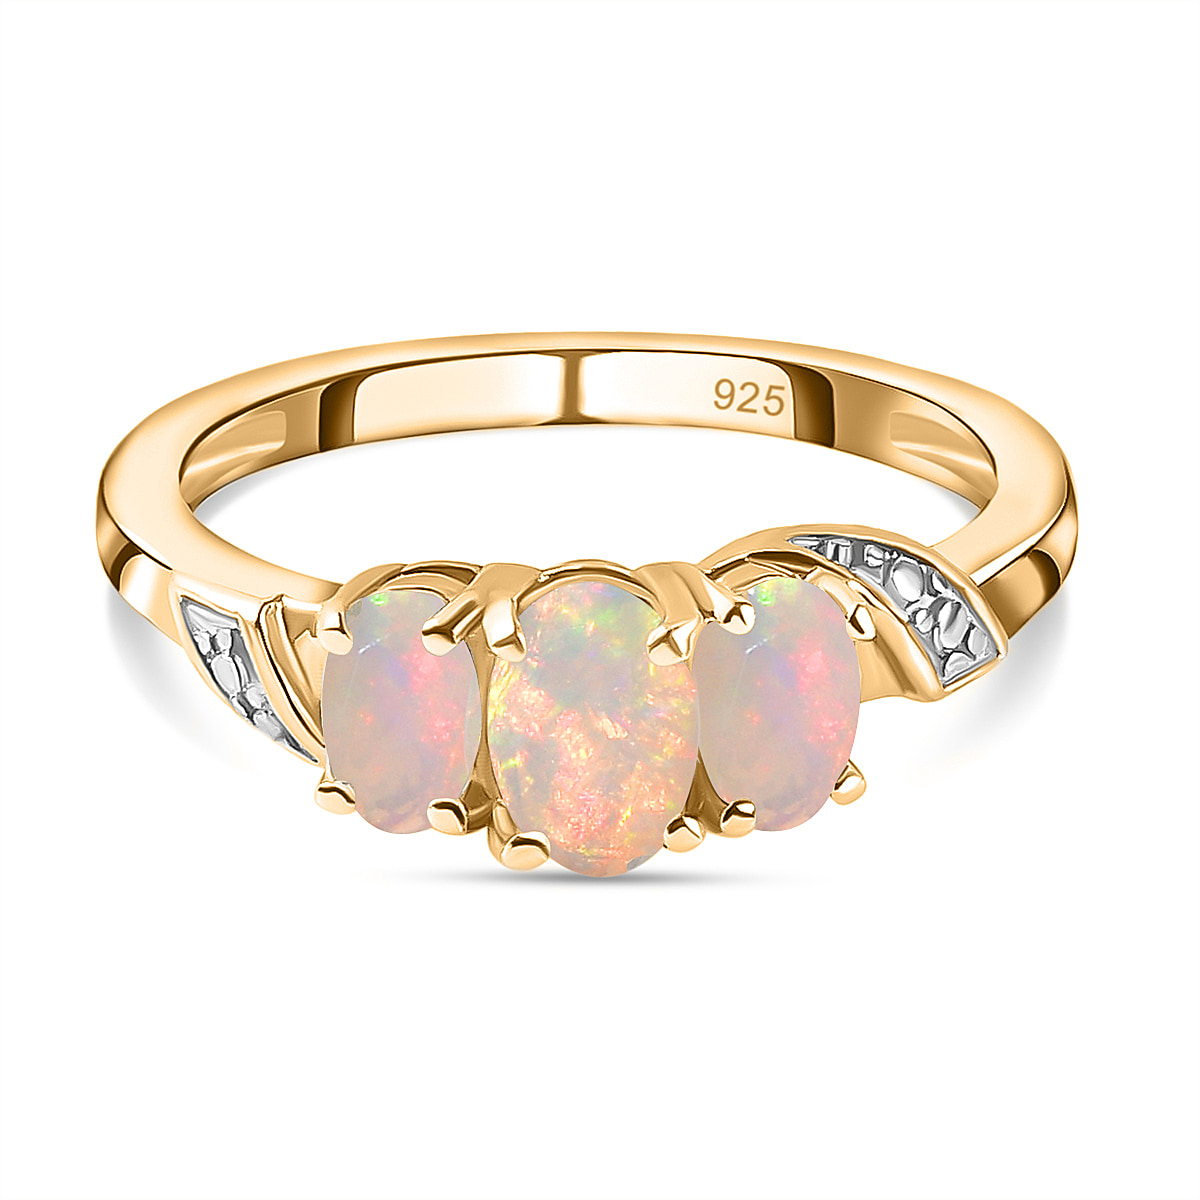 AA Ethiopian Welo Opal Ring in 14K Gold Overlay Sterling Silver 0.60 Ct.